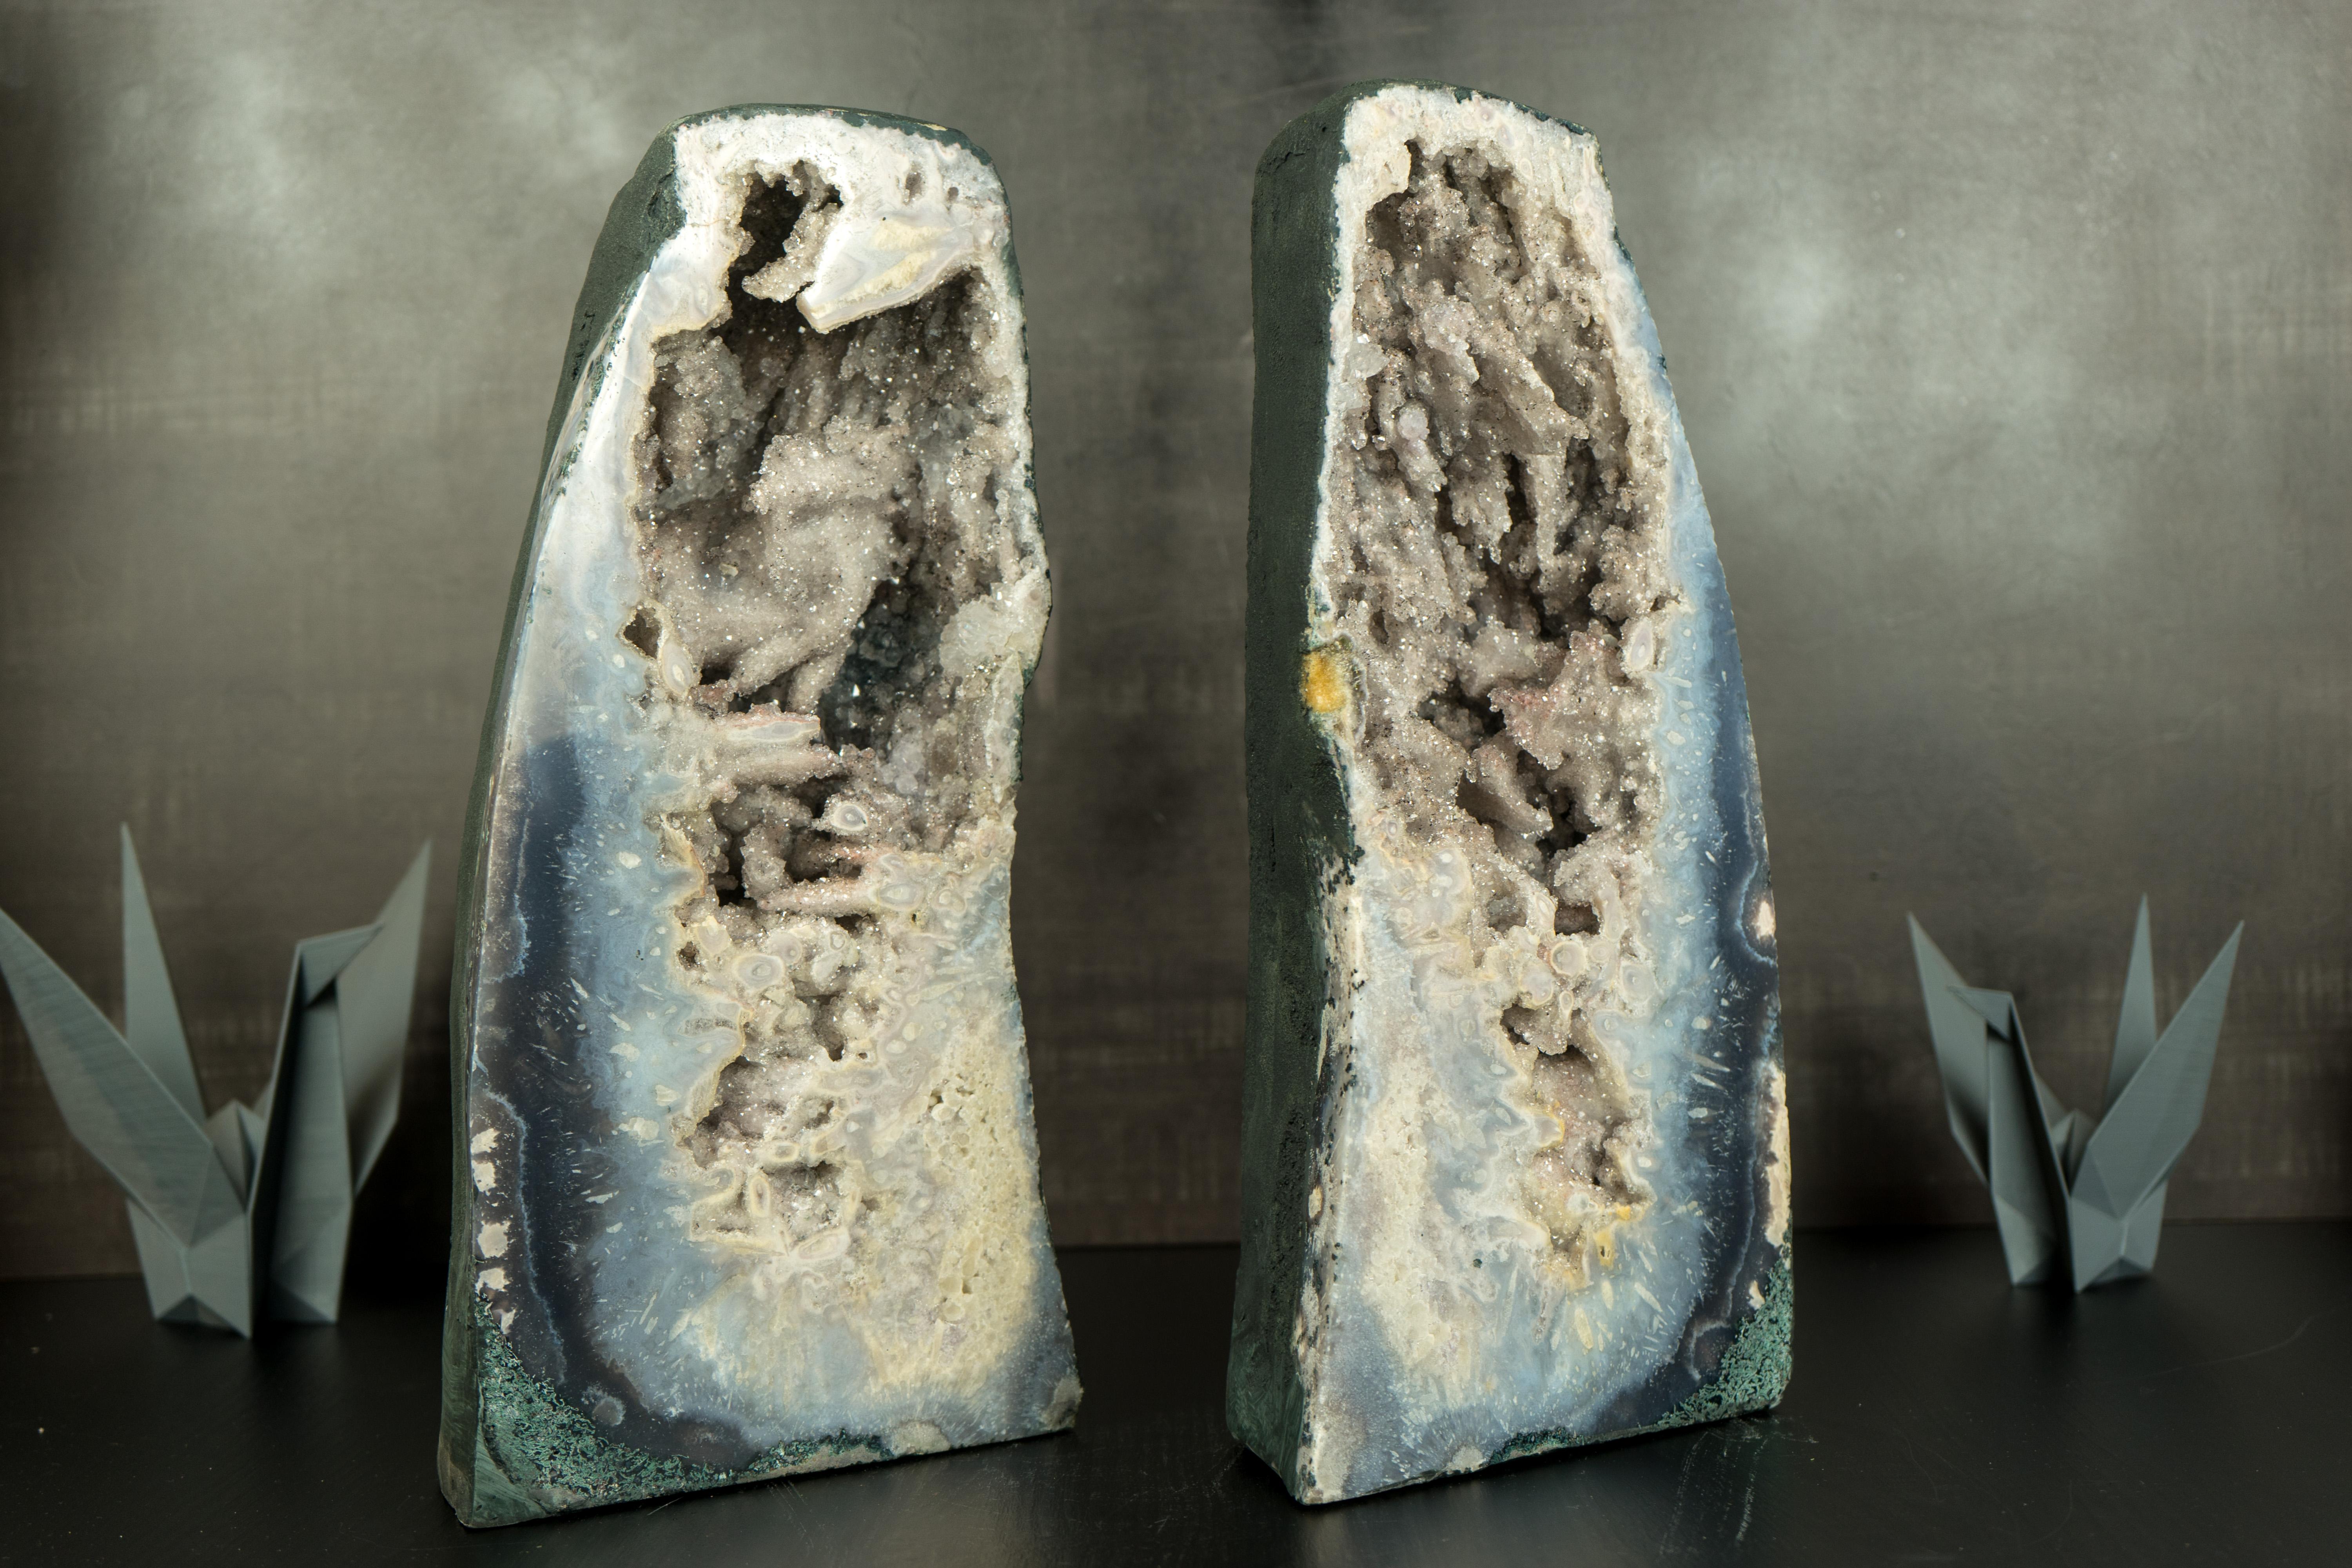 Brazilian Pair of Landscaped Sea Blue Agate Geodes with Crystal Quartz ps. after Anhydrite For Sale